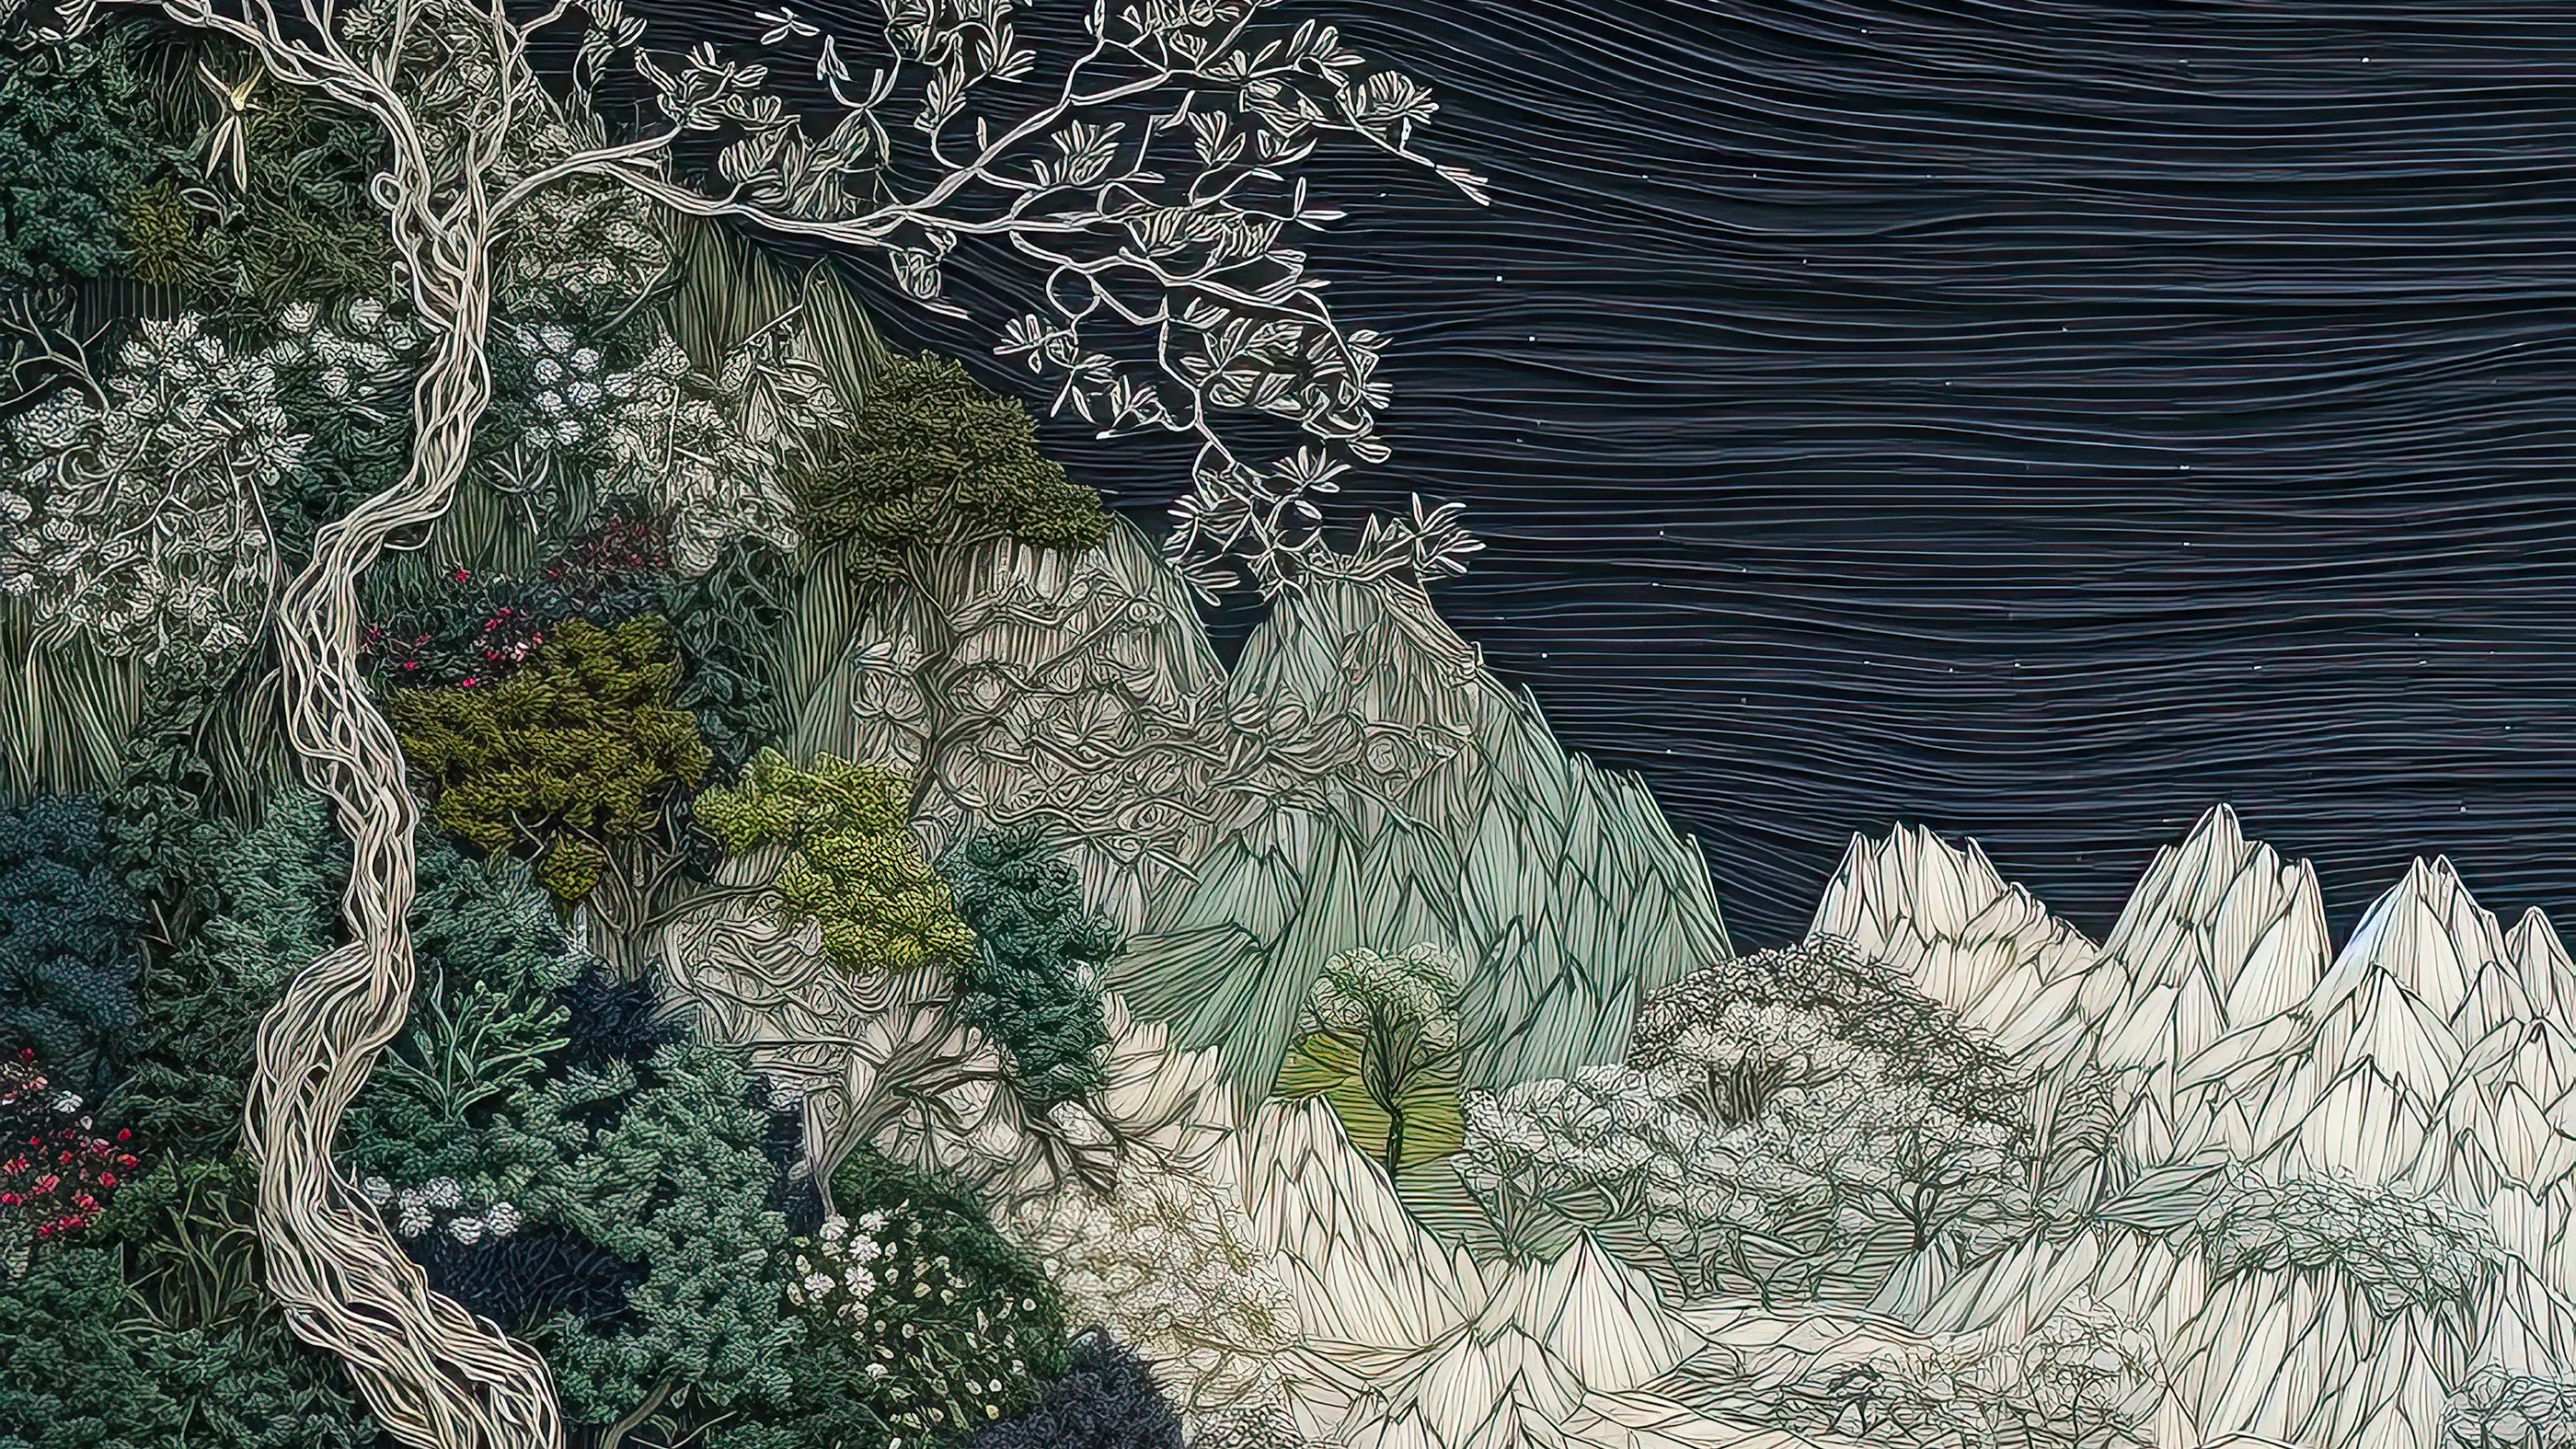 Preview of exhibition named "Yamabushi's Horizons"